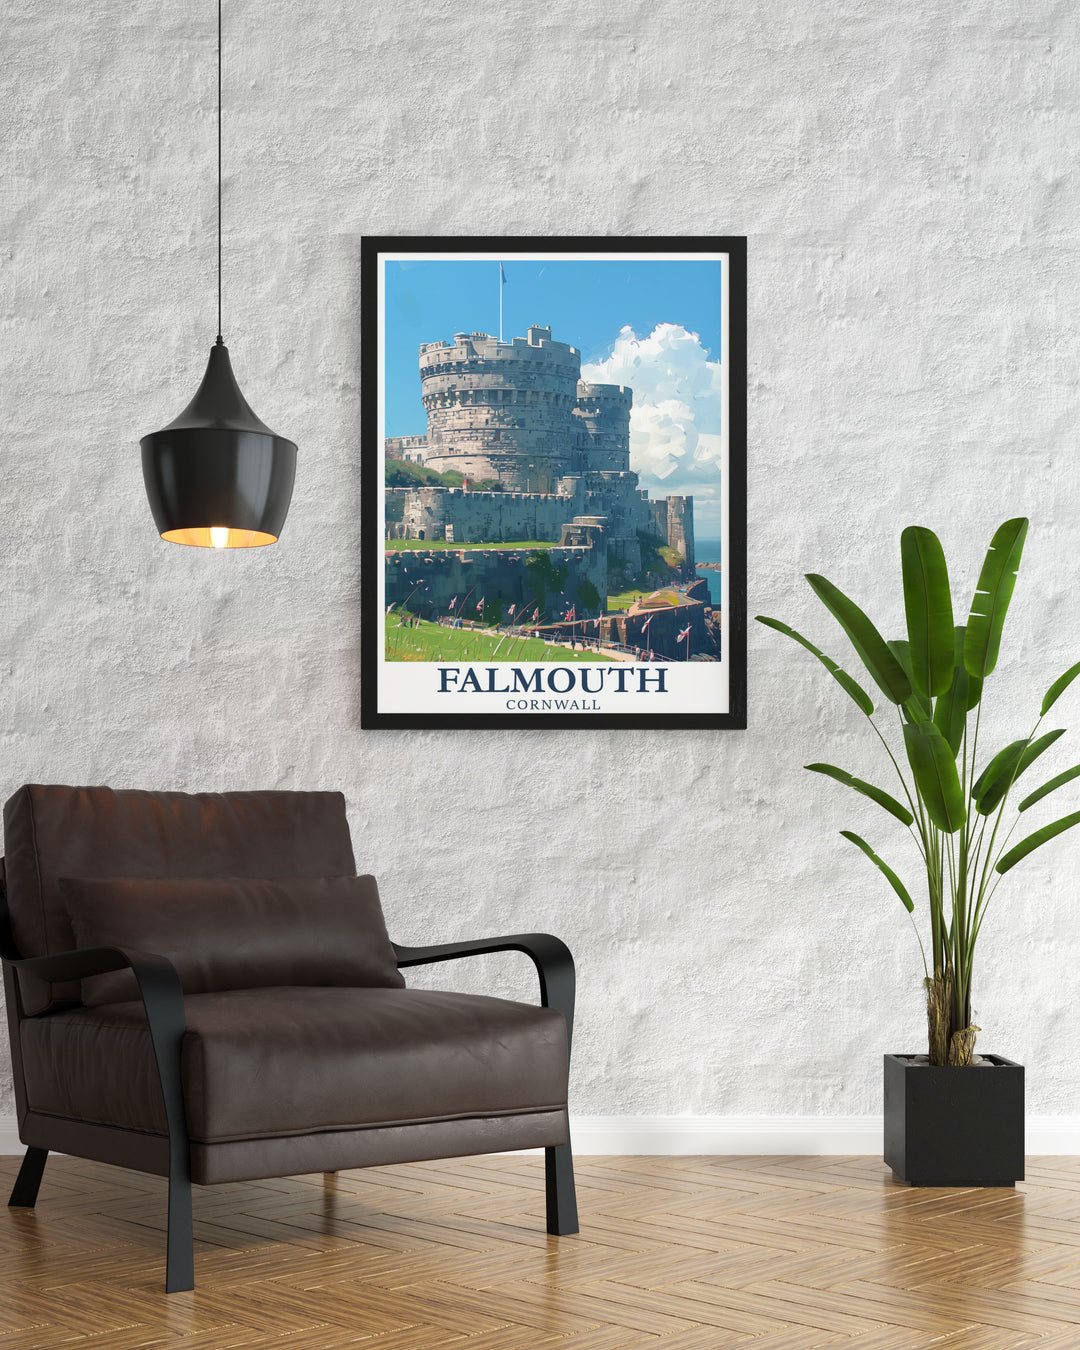 Elegant Pendennis Castle poster featuring the impressive structure and picturesque landscape of Falmouth, Cornwall. This travel print brings the beauty of Cornwall into your home, making it a standout piece in your decor.